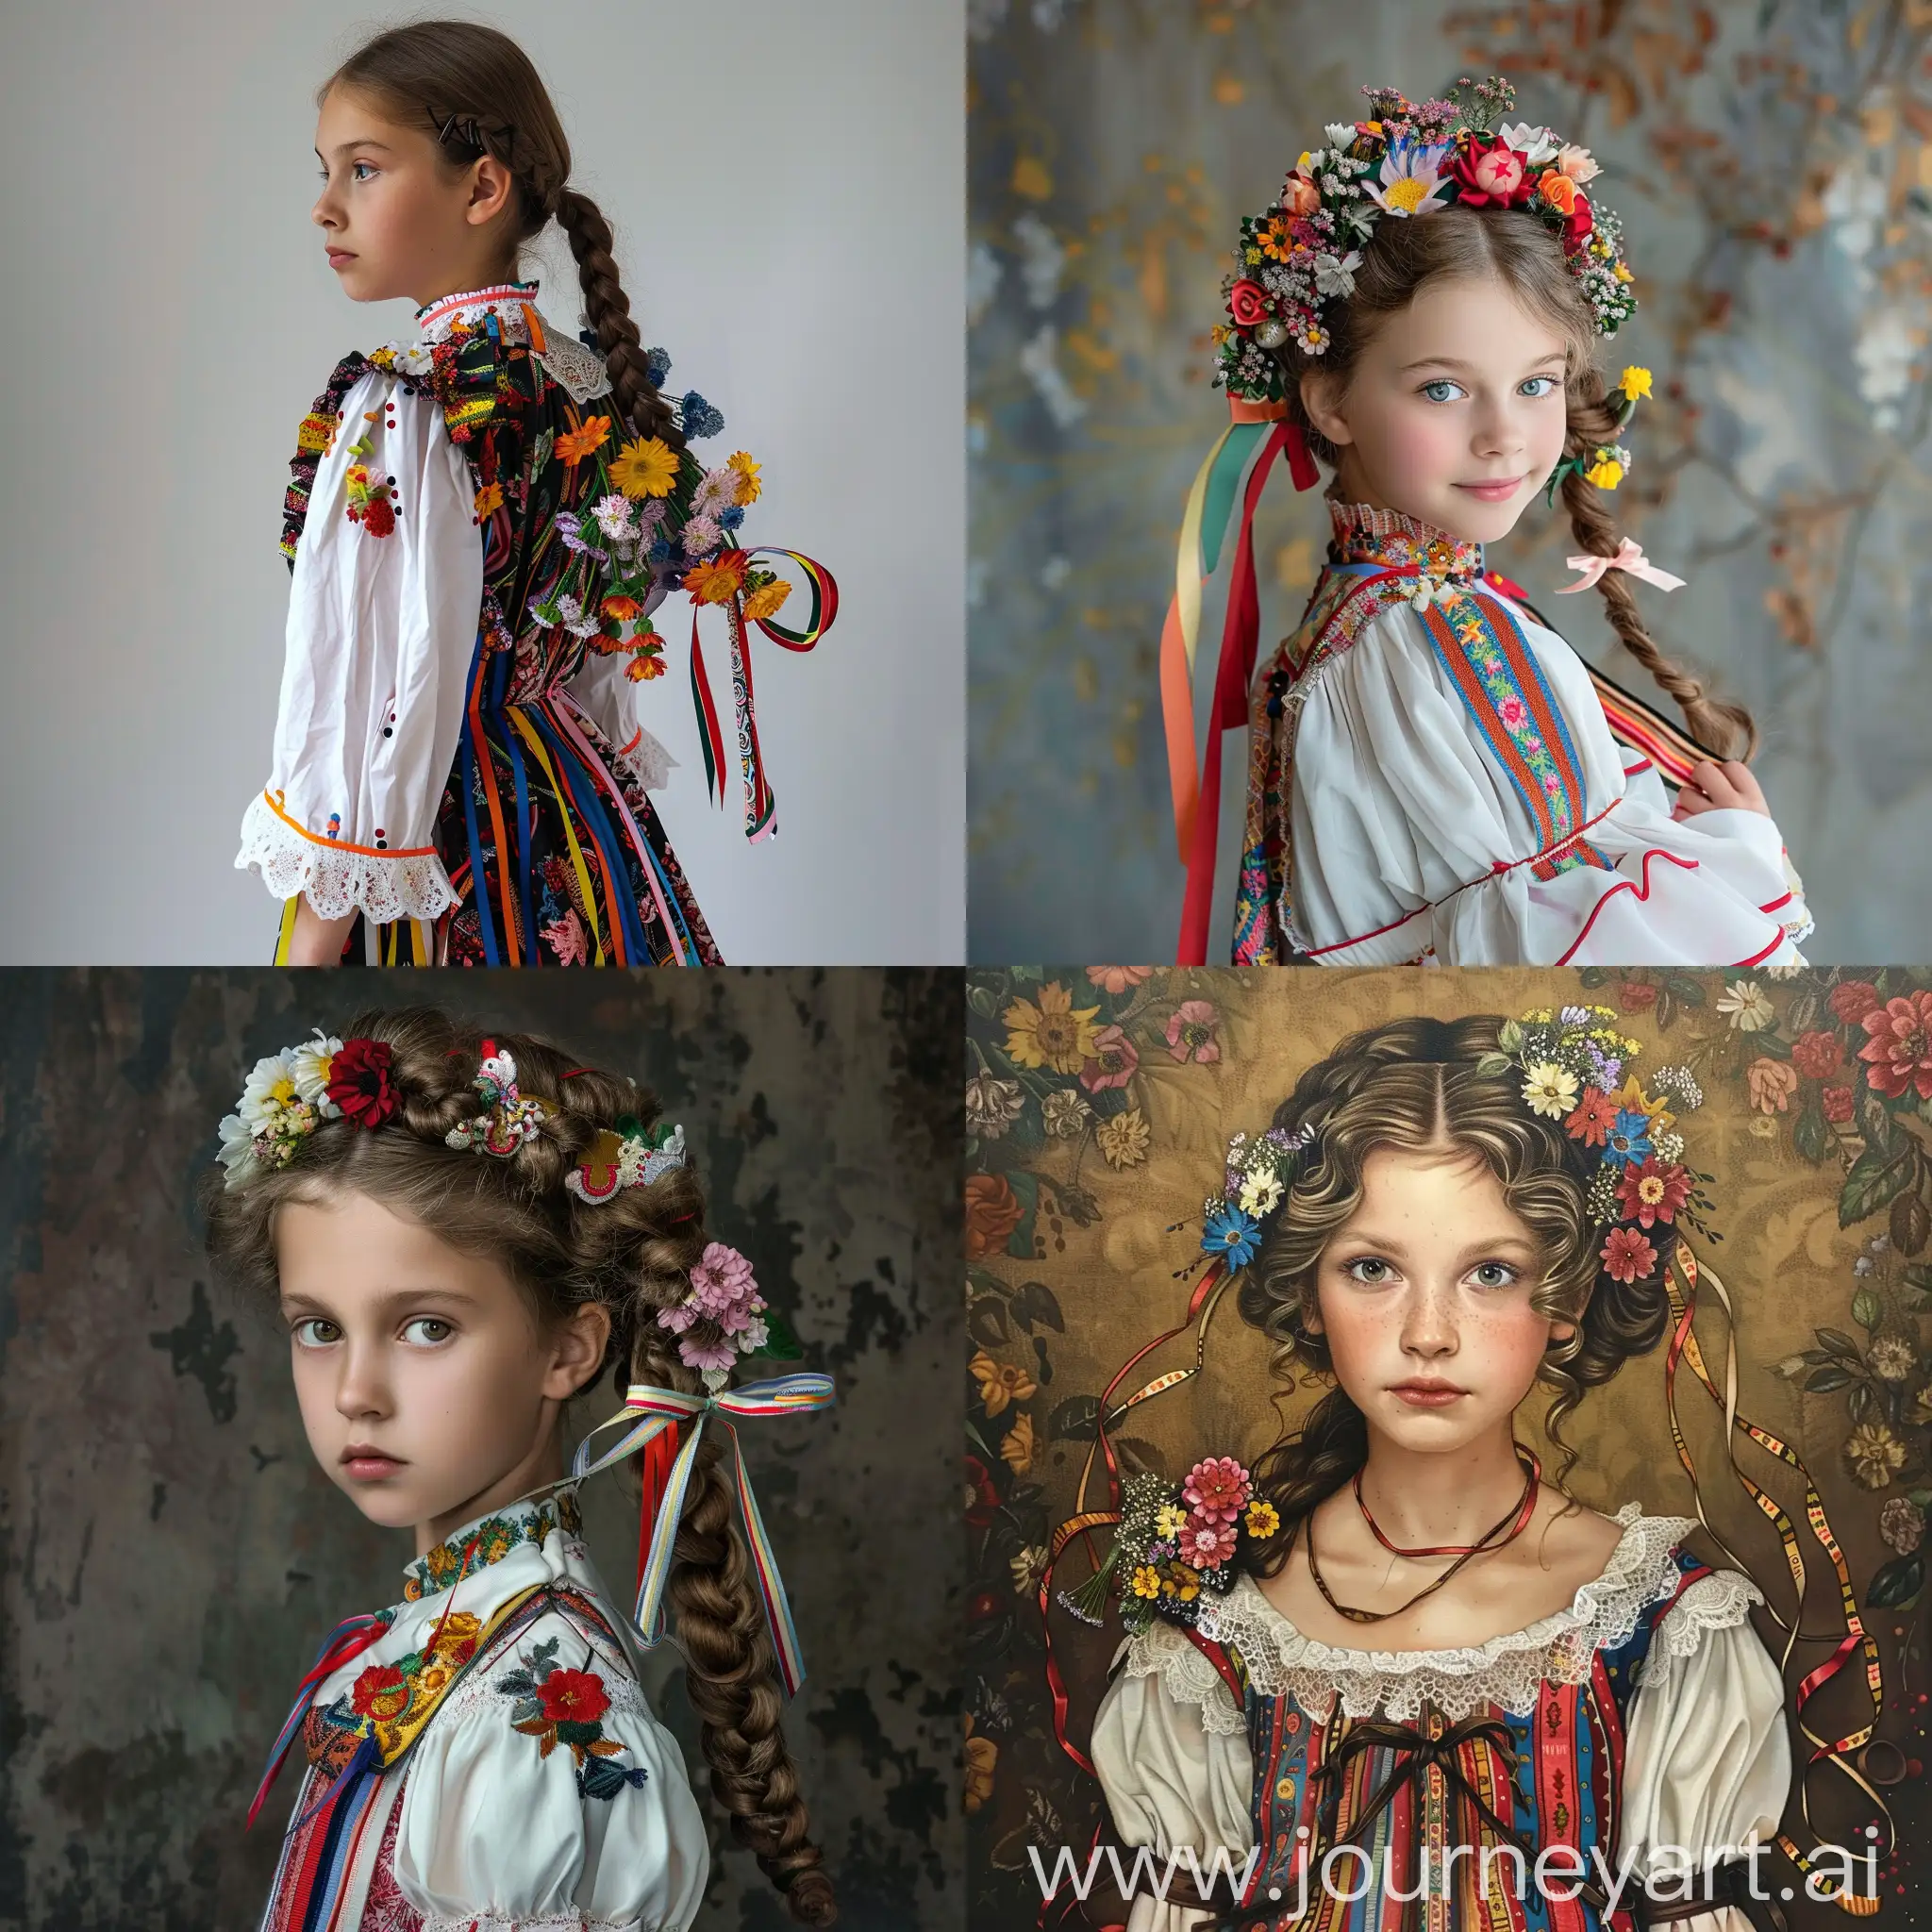 Young-Girl-in-Traditional-Folk-Dress-with-Floral-Adornments